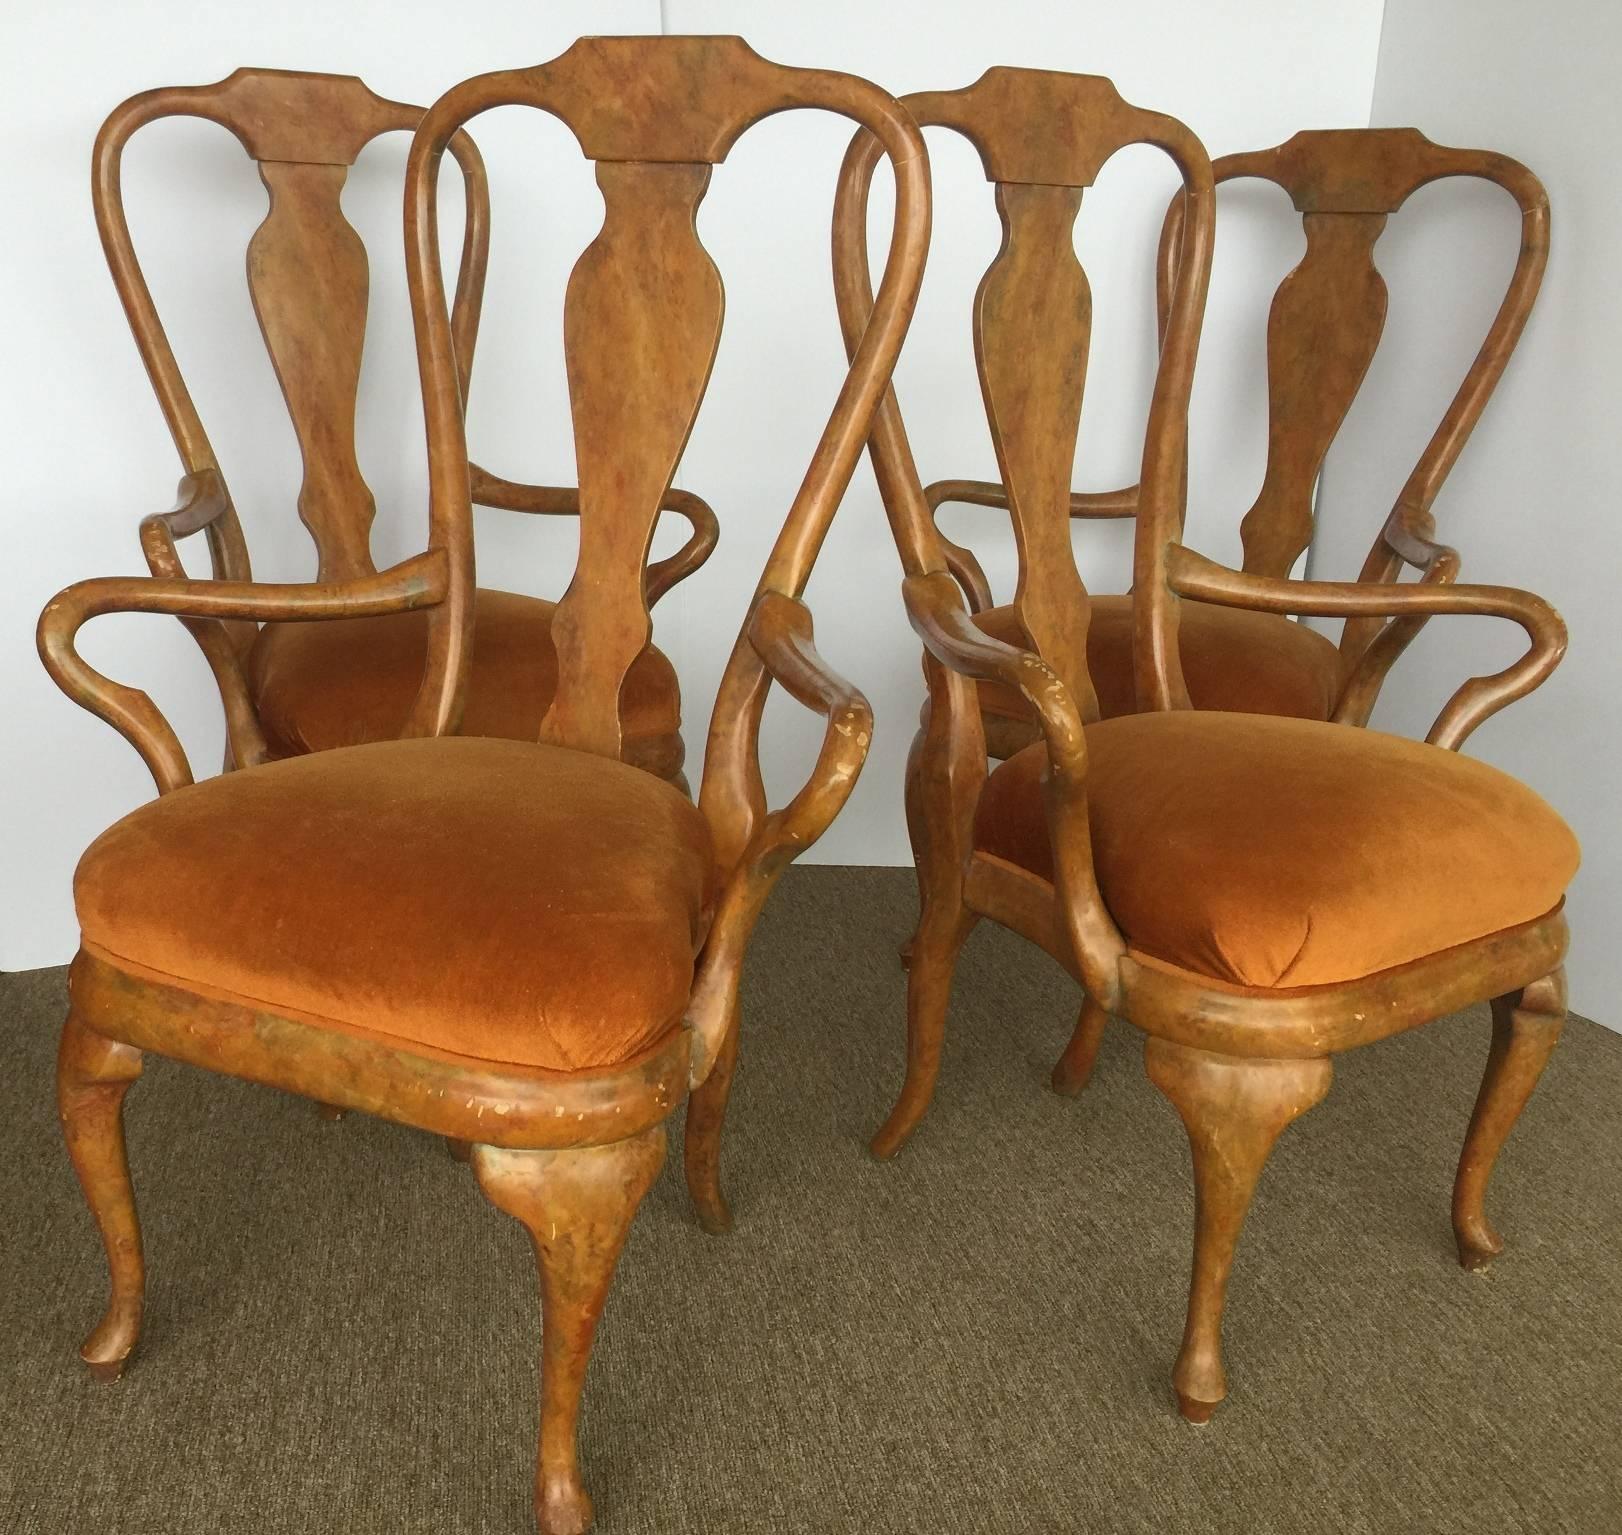 This set of four Oil-Drop lacquered Queen Anne armchairs are classic and beautiful Phyllis Morris Originals. The original label is attached under the seats. Morris’s designs have been described accurately as “Alice in Wonderland meets Queen Anne.” A